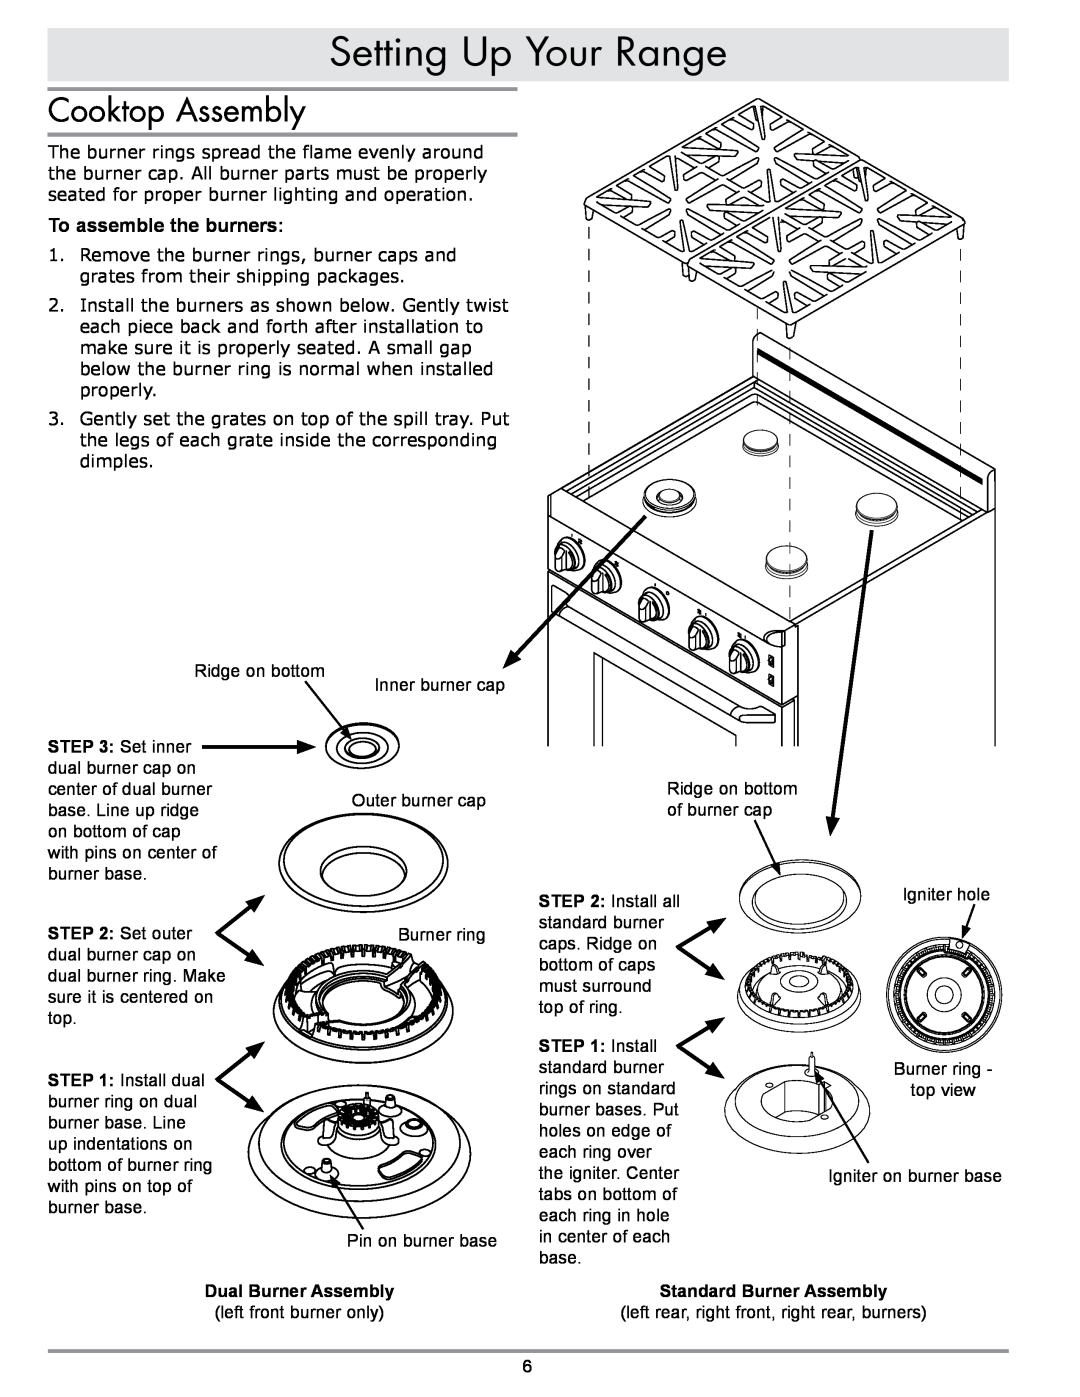 Sears ER30GI manual Setting Up Your Range, Cooktop Assembly, To assemble the burners, Dual Burner Assembly 